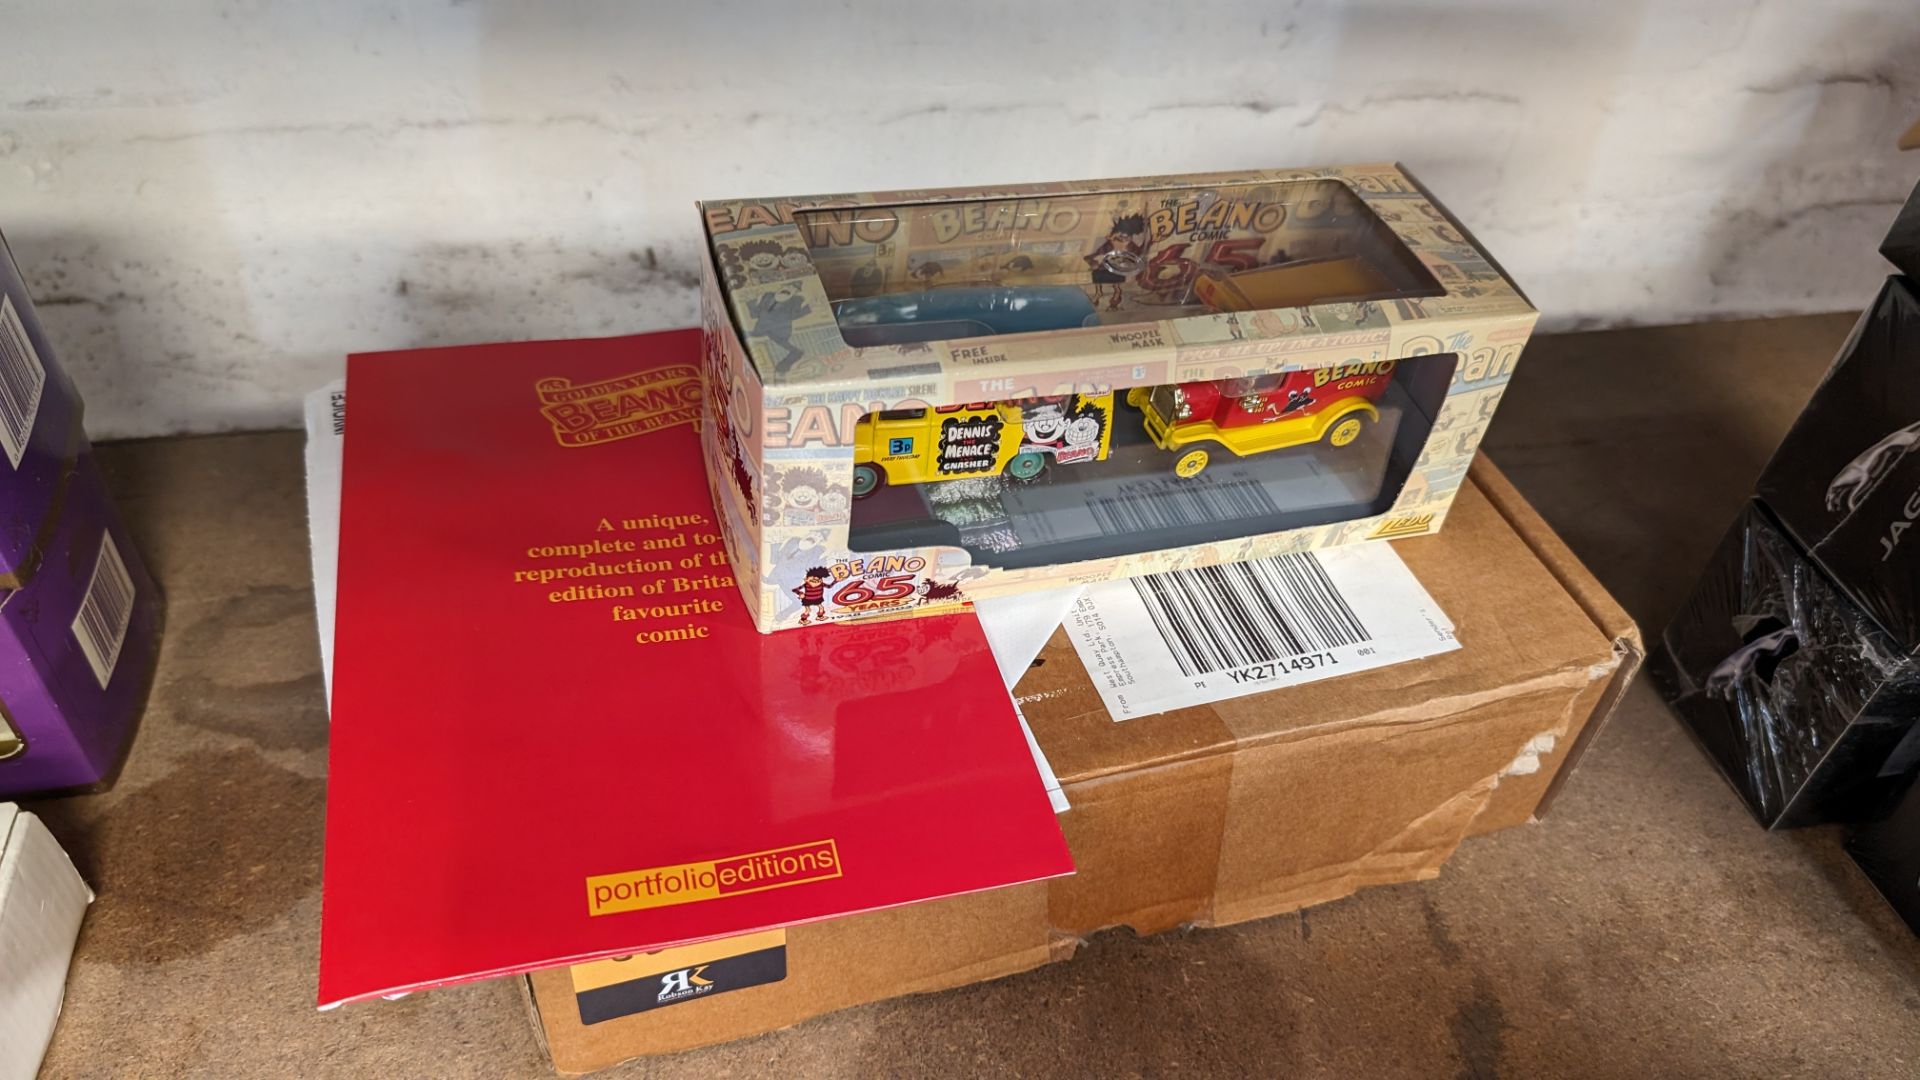 Beano 65th anniversary gift set including reproduction of the first edition of the comic plus 2 mode - Bild 2 aus 9